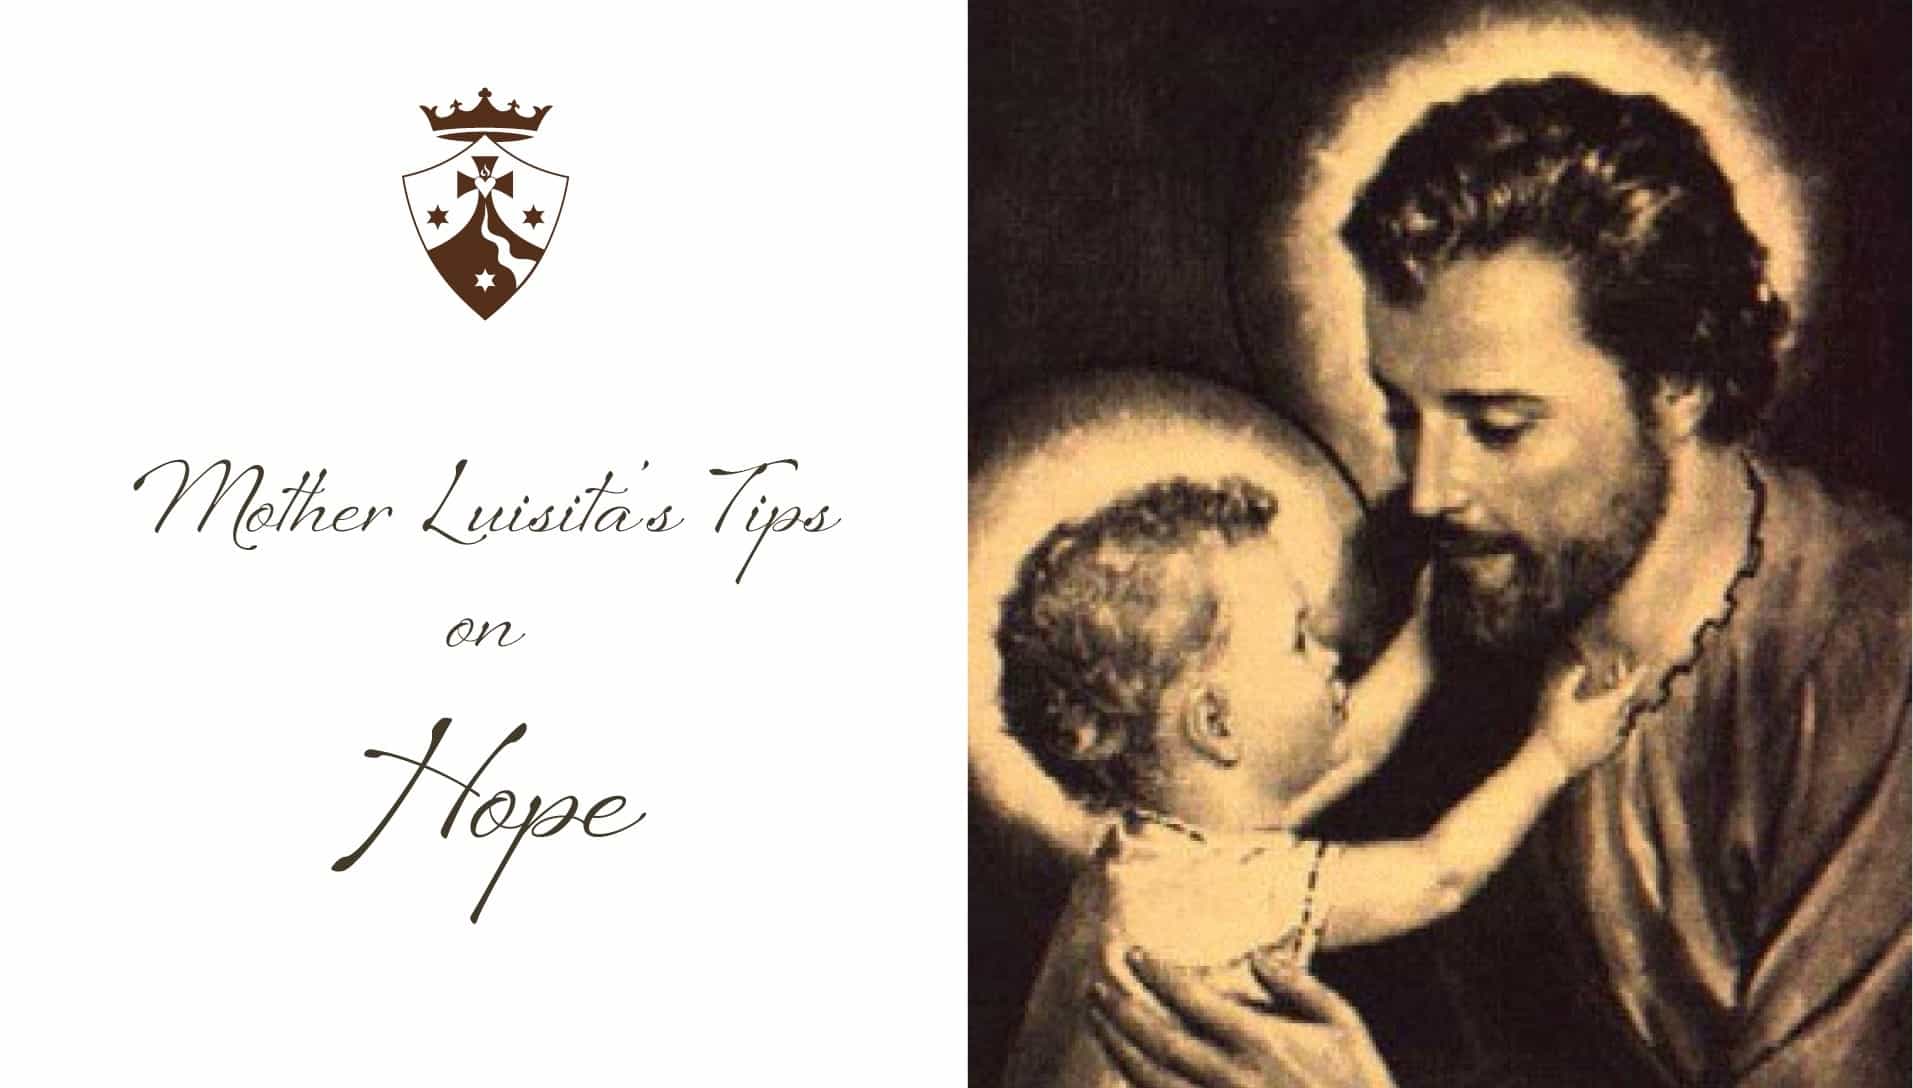 'Mother Luisita's Tips on Hope' image of baby Jesus reaching out to St Joseph